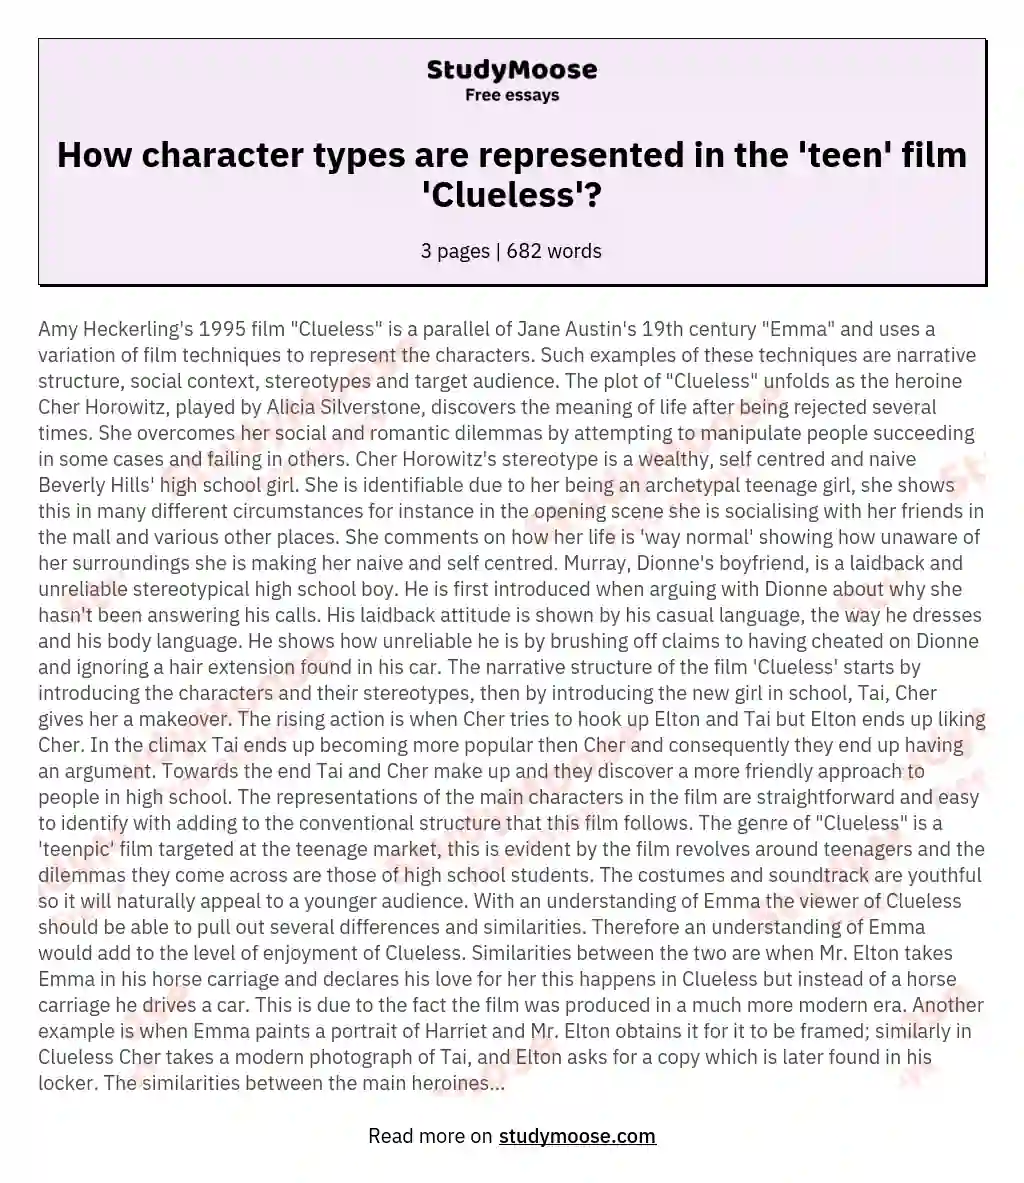 How character types are represented in the 'teen' film 'Clueless'?